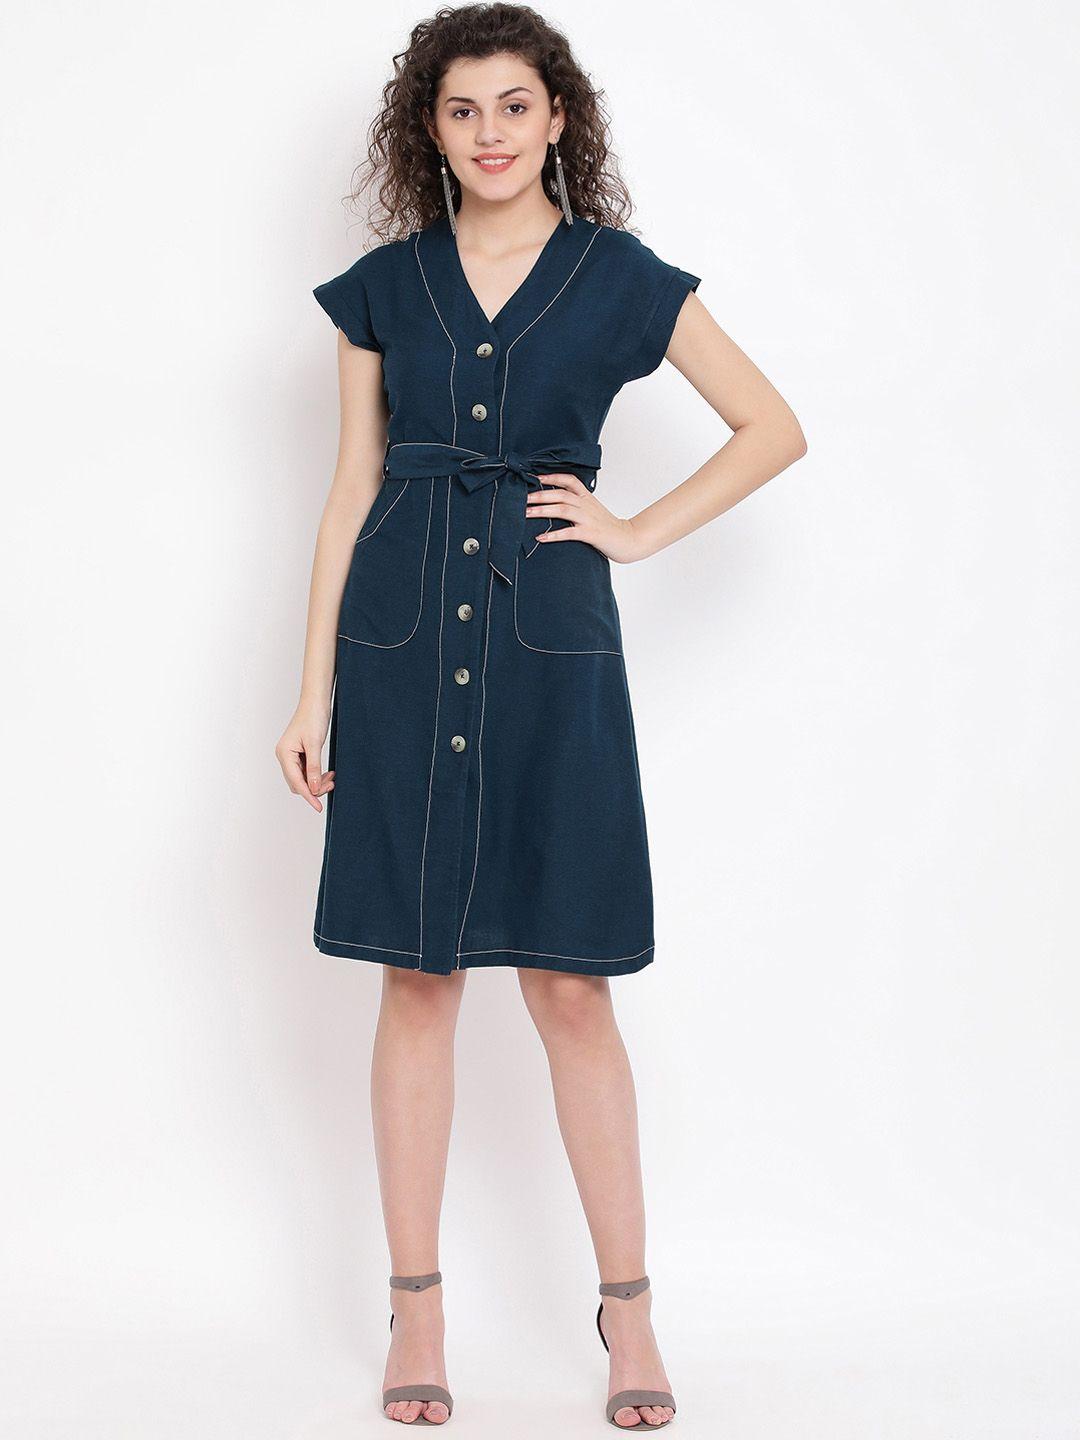 oxolloxo-women-navy-blue-solid-fit-and-flare-dress